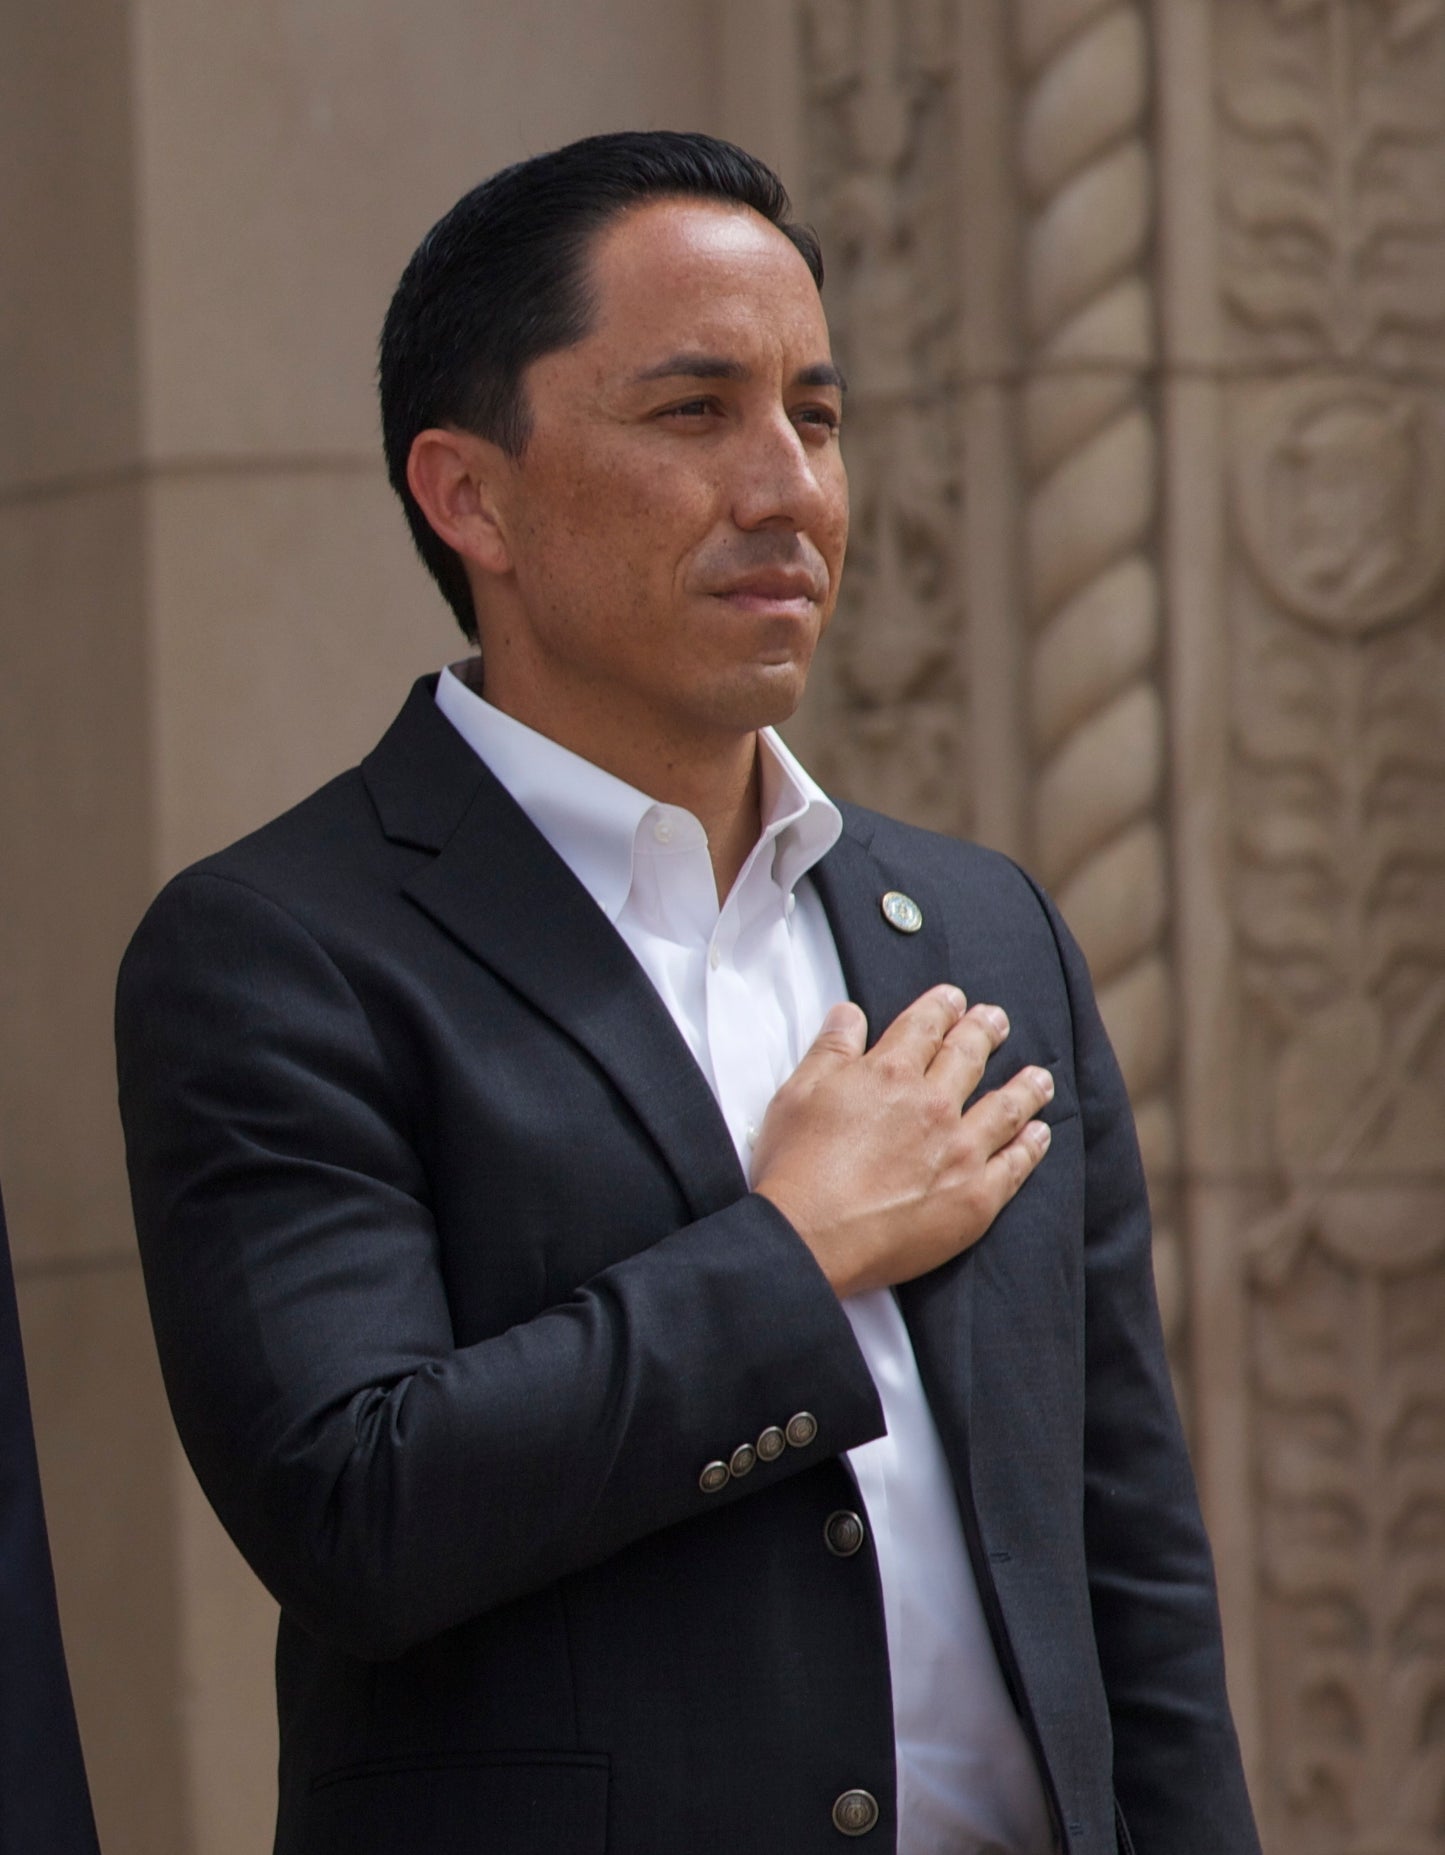 TODD GLORIA SAN DIEGO CA USA MAYOR GLOSSY POSTER PICTURE PHOTO PRINT BANNER